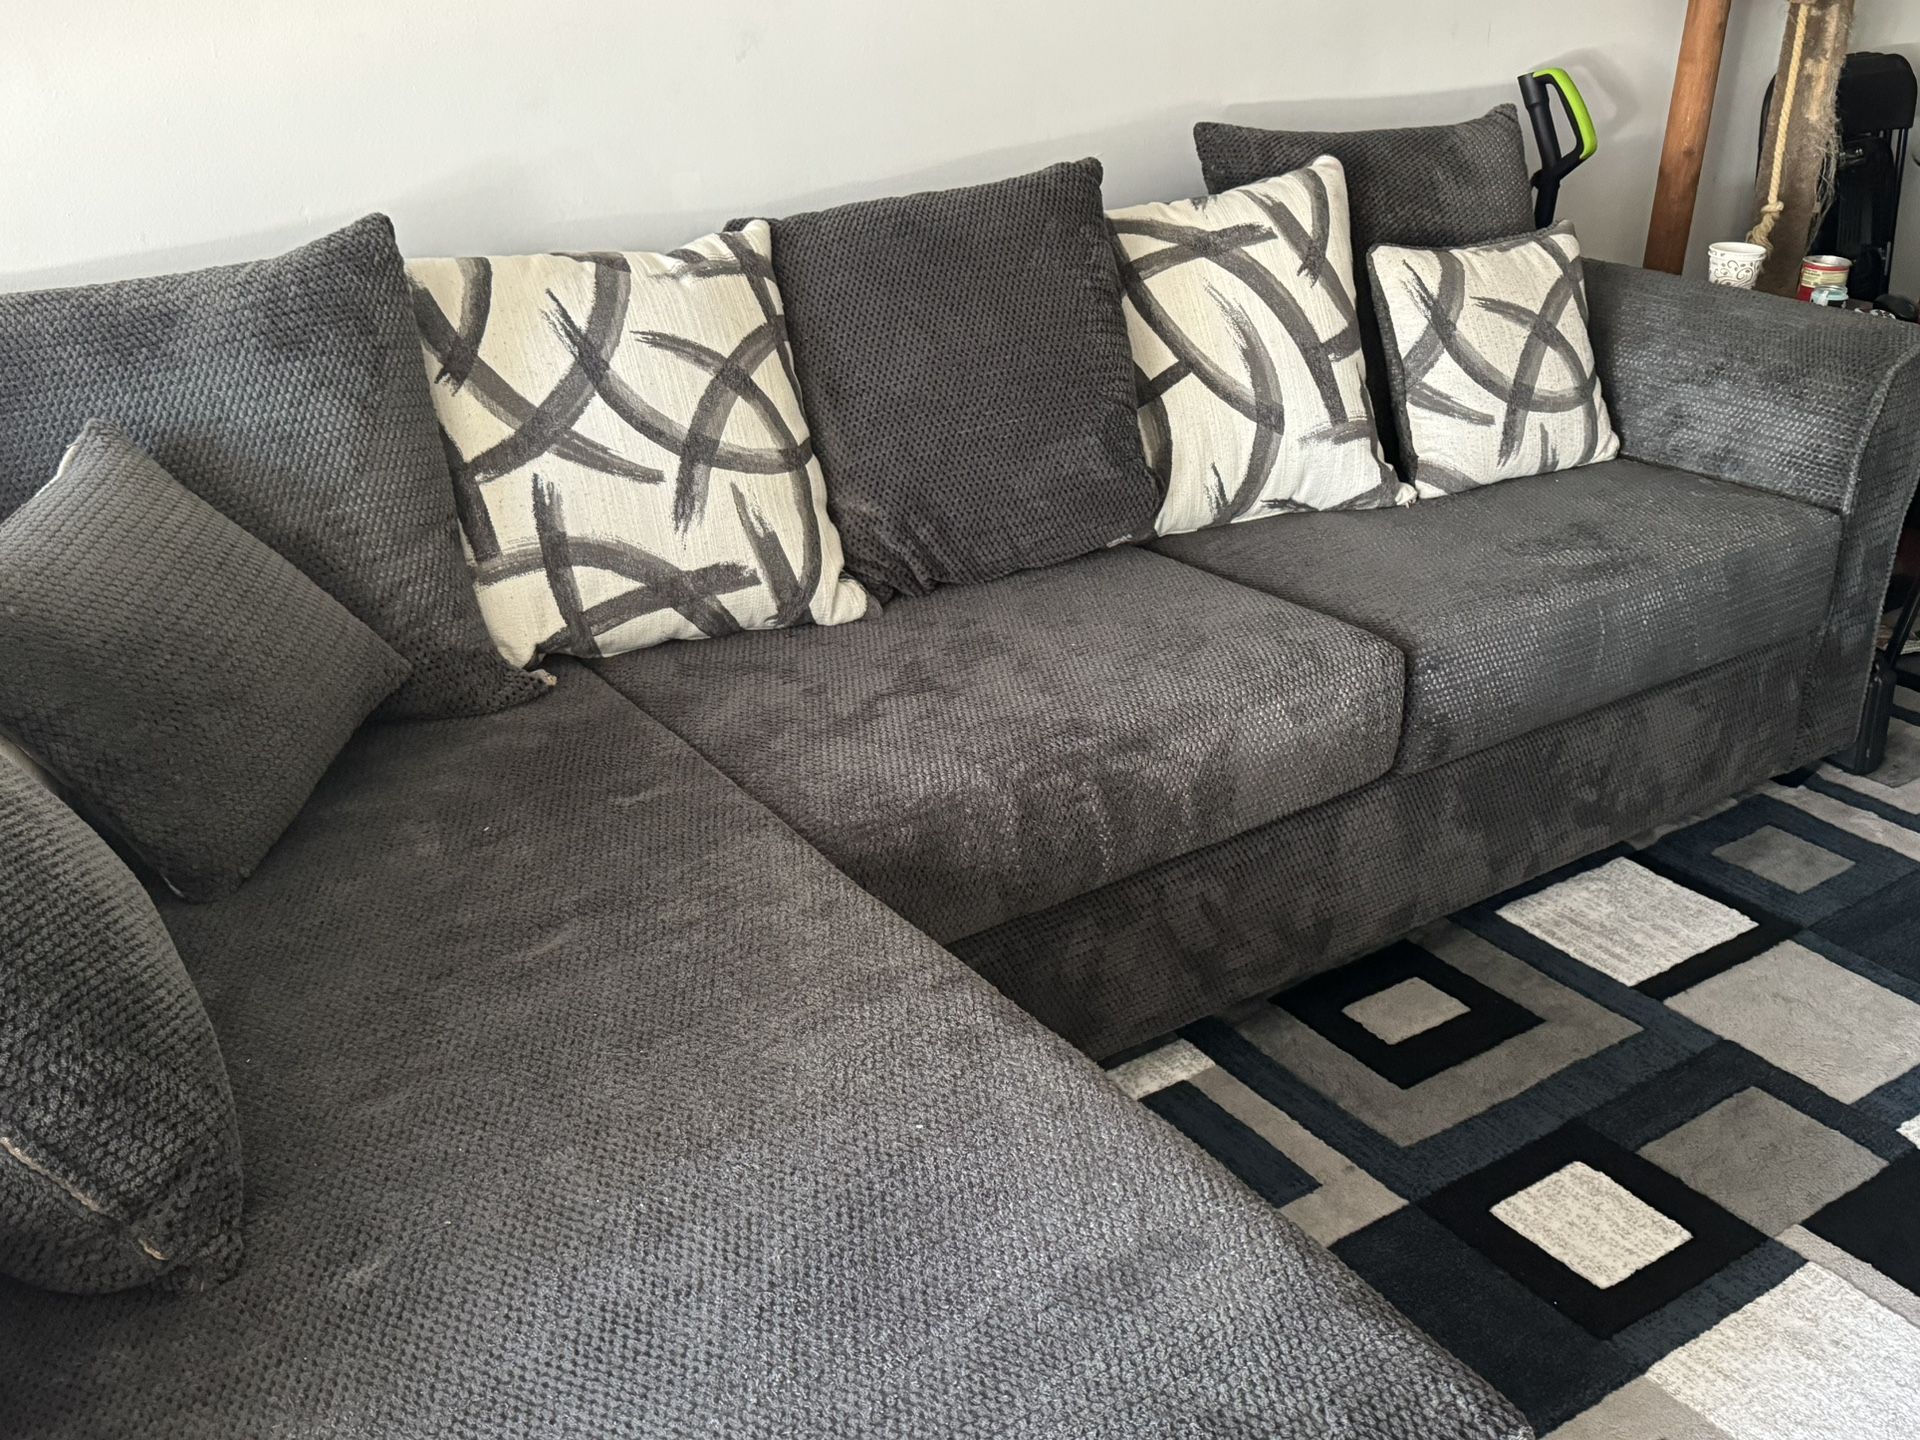 Fairly New Sectional Sofa (Couch)